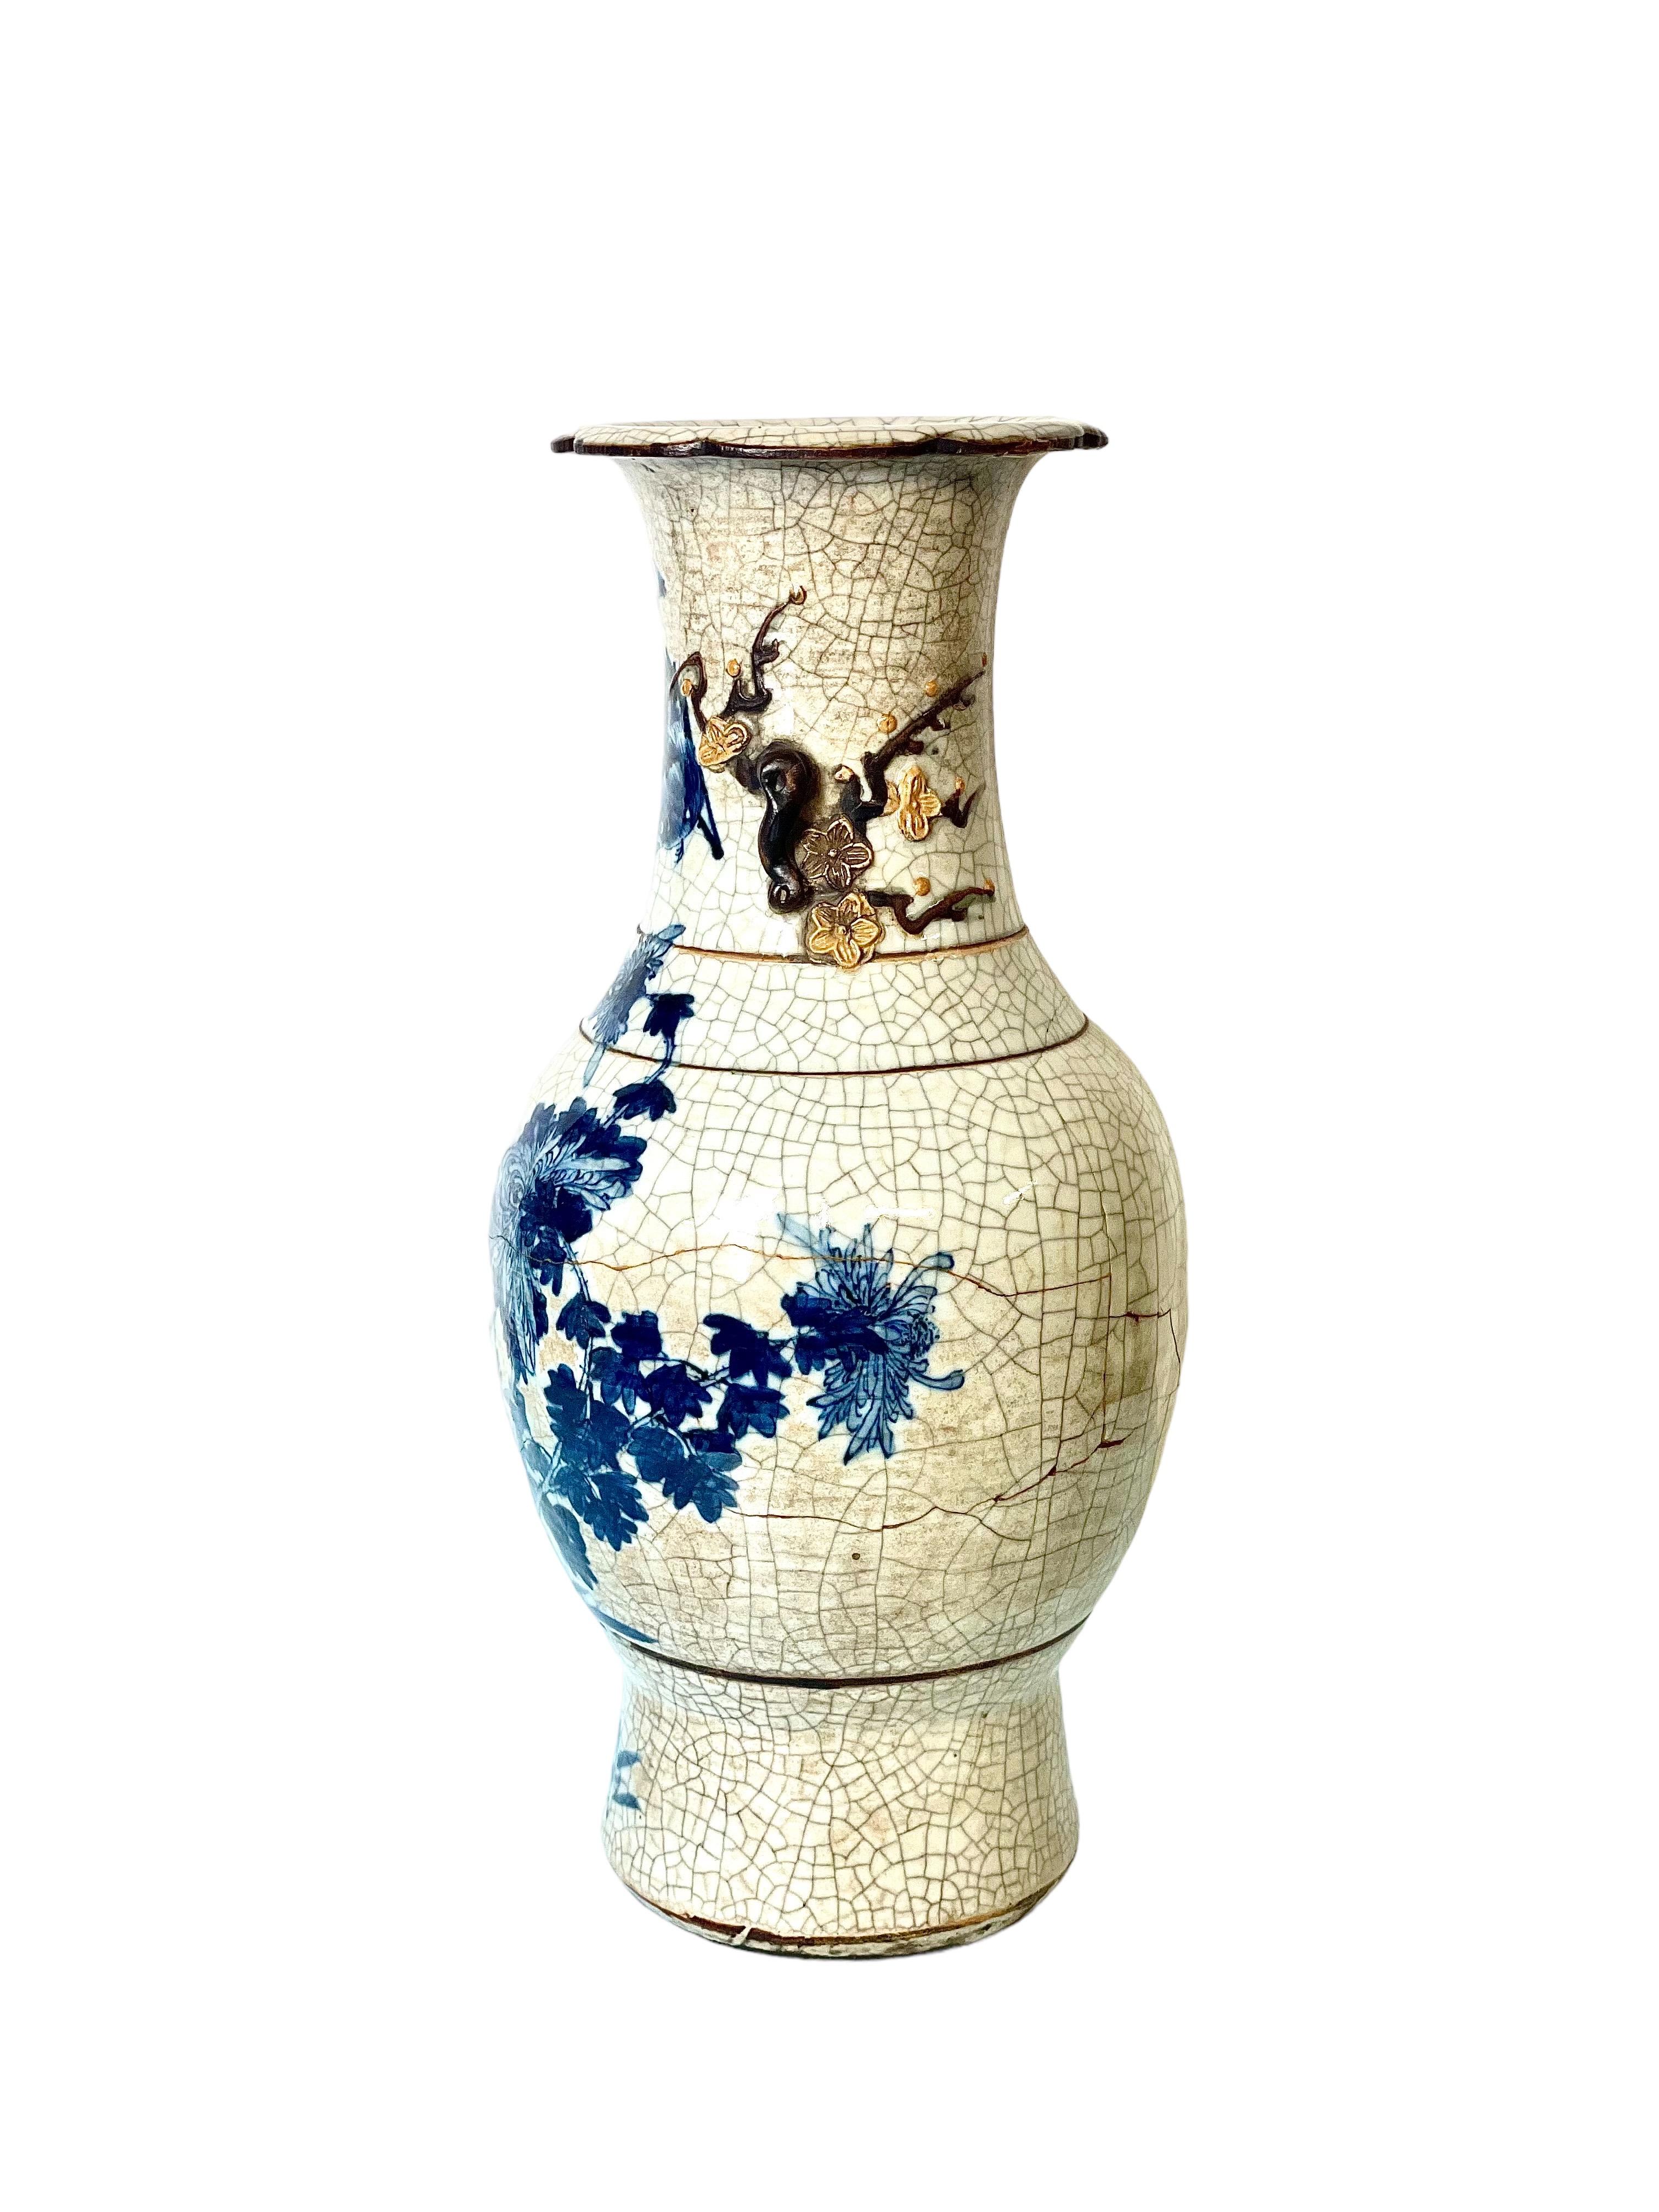 Full of character, this wonderful late 19th century Chinese Nanjing baluster vase features exquisite hand-painted decorations of birds and fish in vivid blue around its lower belly and reaching up around its neck. The white/beige background features